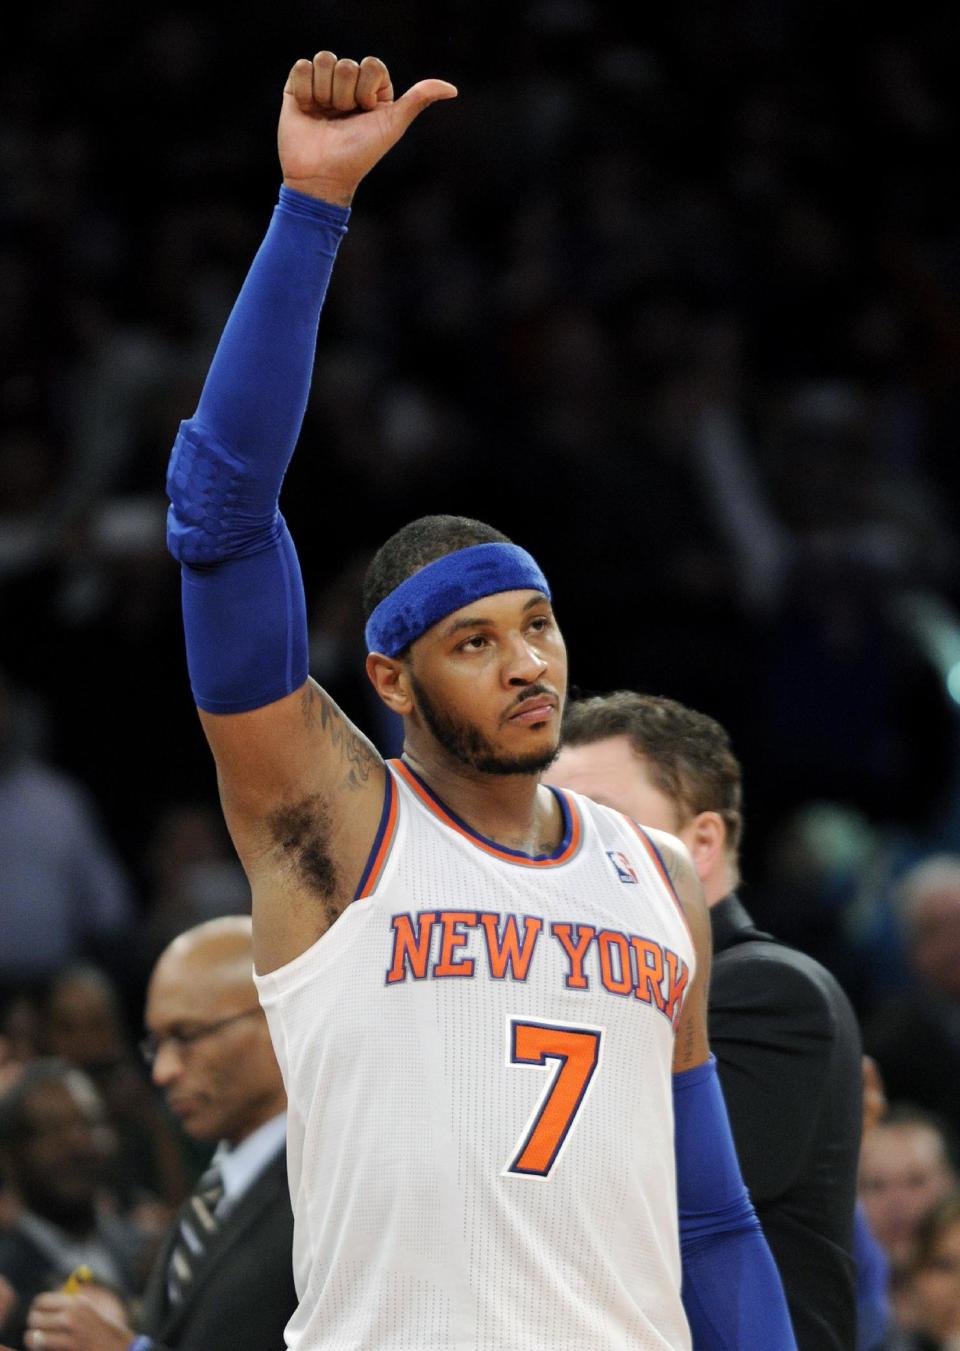 New York Knicks' Carmelo Anthony reacts to the fans after scoring 62 points and coming out of an NBA basketball game during the fourth quarter against the Charlotte Bobcats Friday, Jan. 24, 2014, at Madison Square Garden in New York. The Knicks won 125-96. (AP Photo/Bill Kostroun)